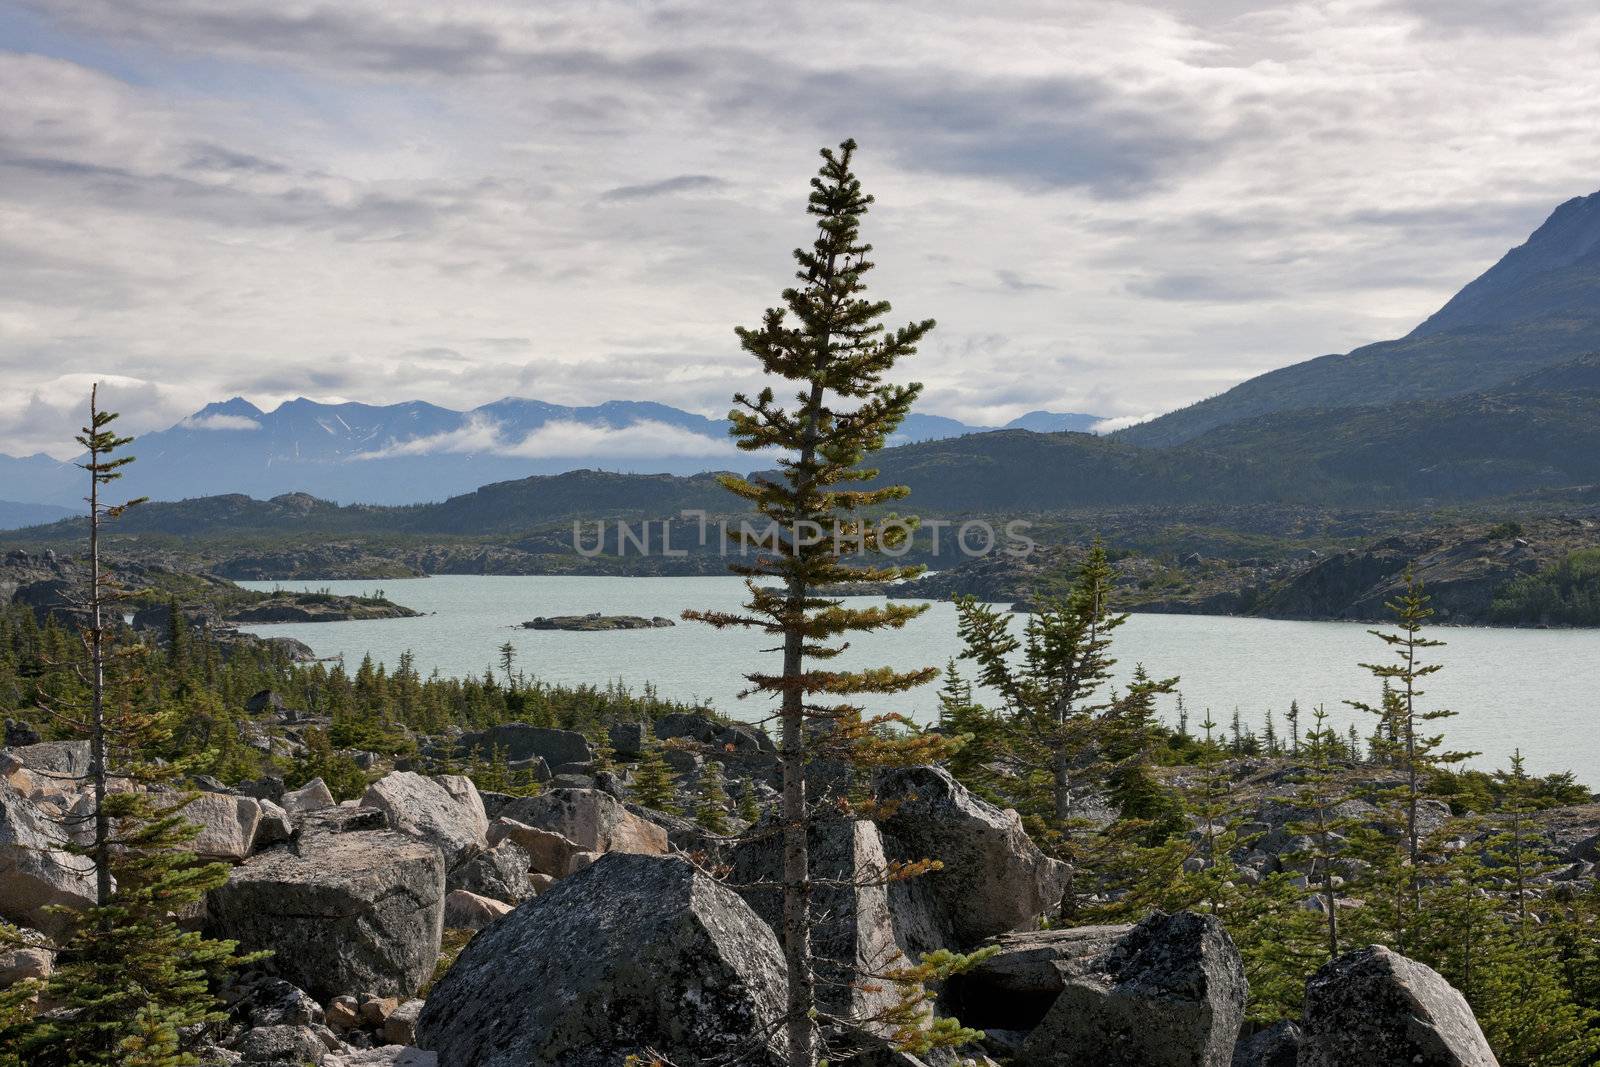 Scenery with glacier lake and vegetation along the Klondike high by Claudine